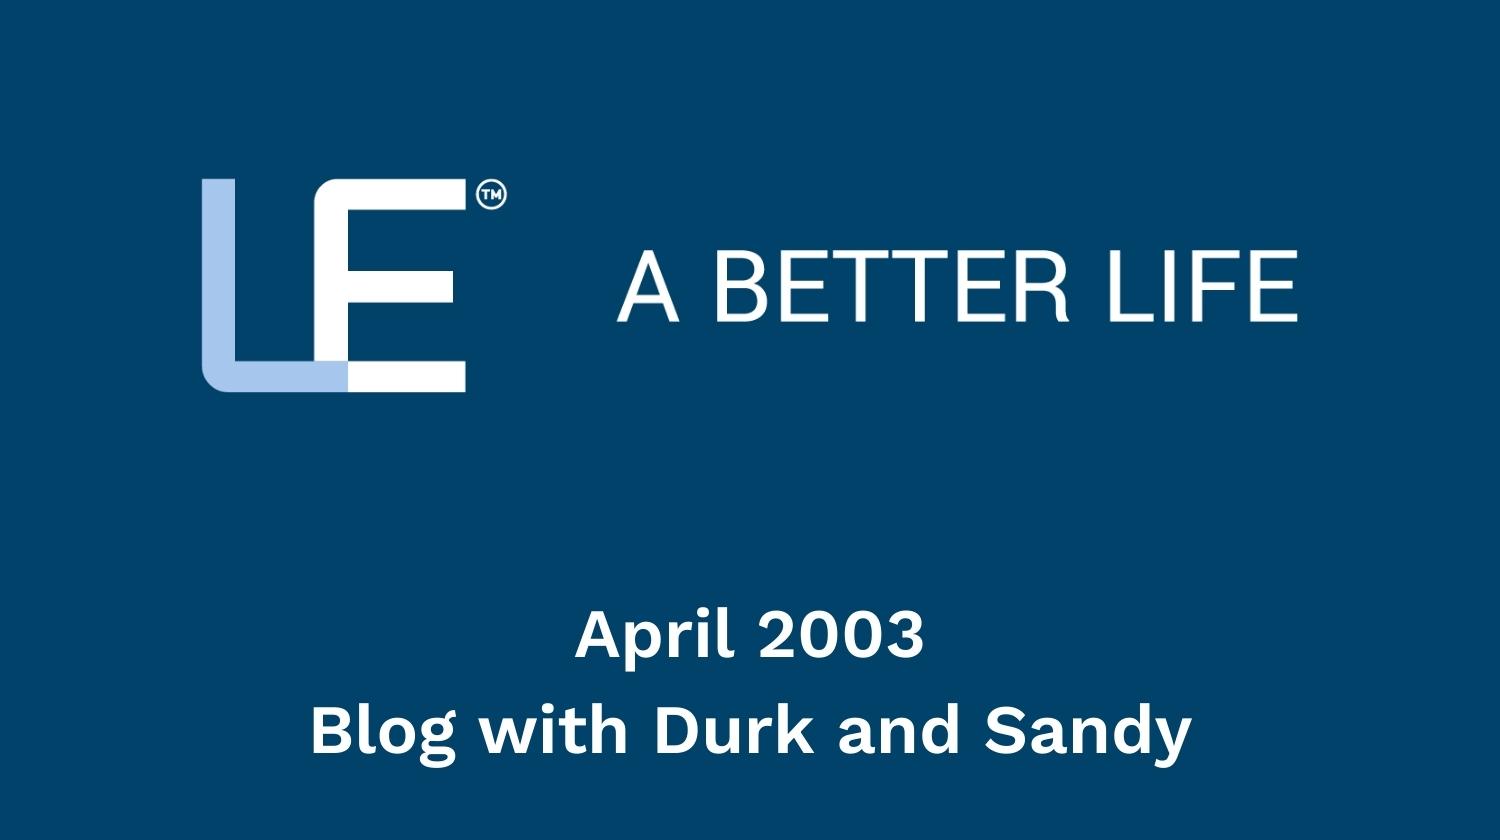 April 2003 Blog with Durk and Sandy